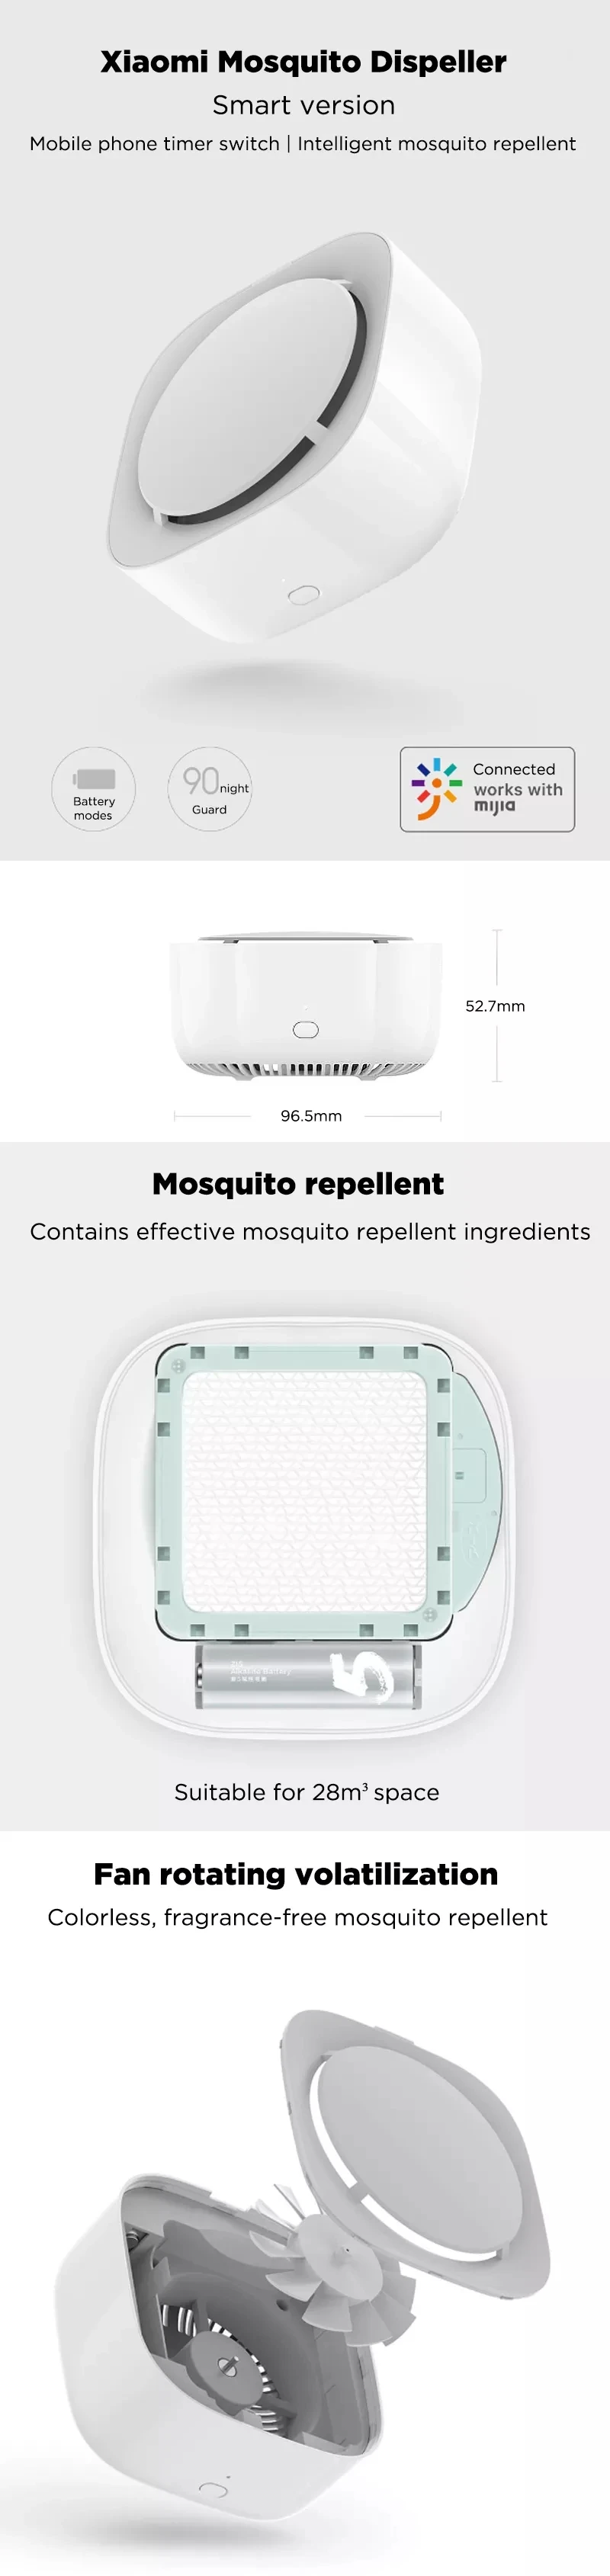 2019 New Xiaomi Mijia Mosquito Repellent Killer Smart Version Phone timer switch with LED light use 90 days Work in mihome AP